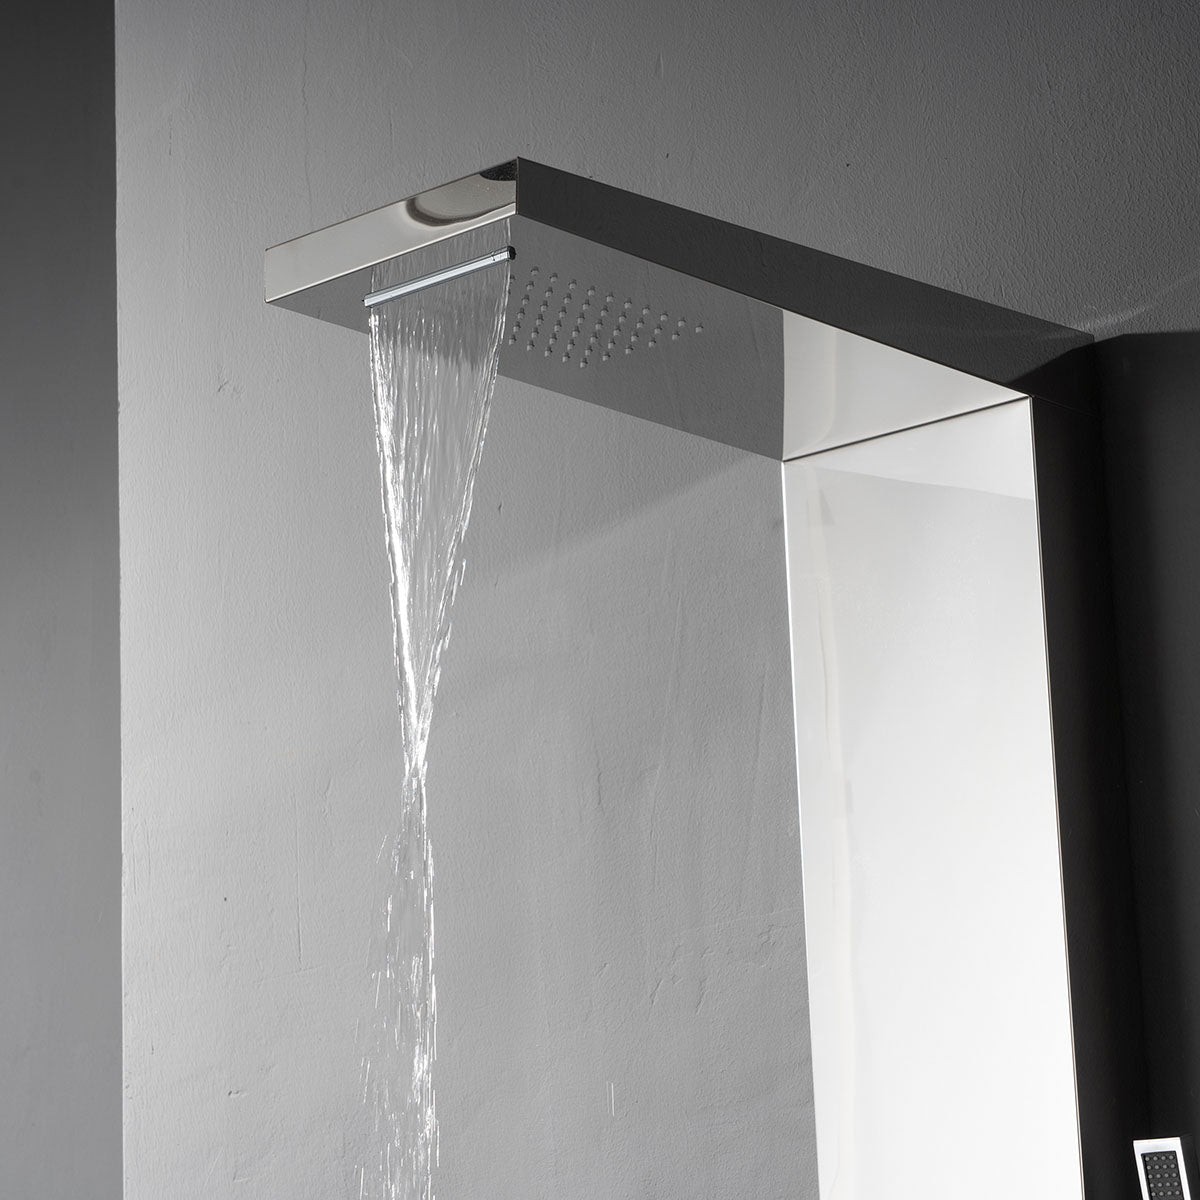 SP-8025C Stainless Steel Shower Panel (Chrome) - iStyle Bath